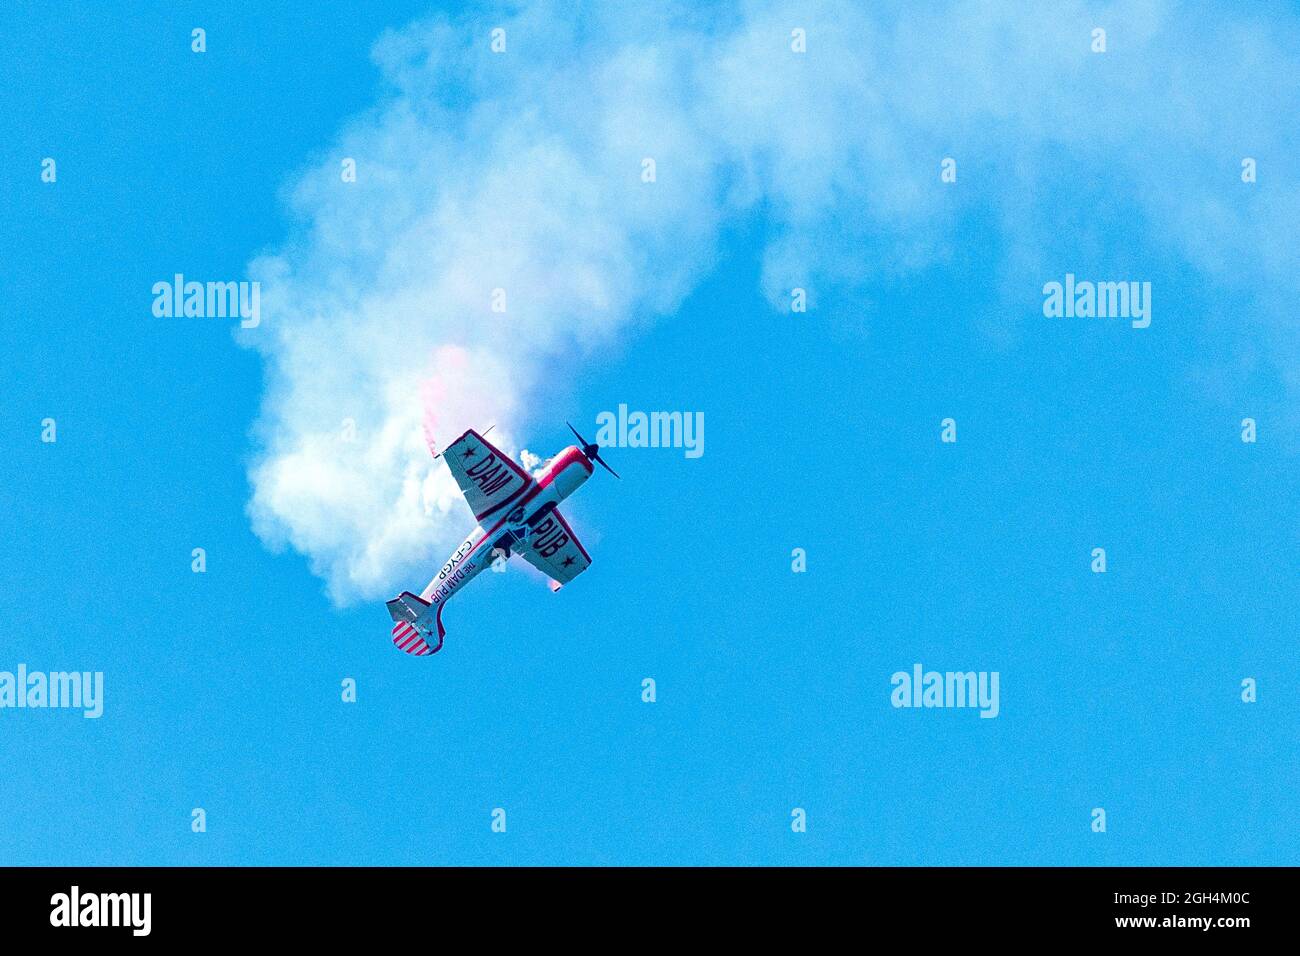 Gord Price Yak-50 or Dam Pub plane flying during the Canadian International Air Show (CIAS) in Toronto, Canada Stock Photo